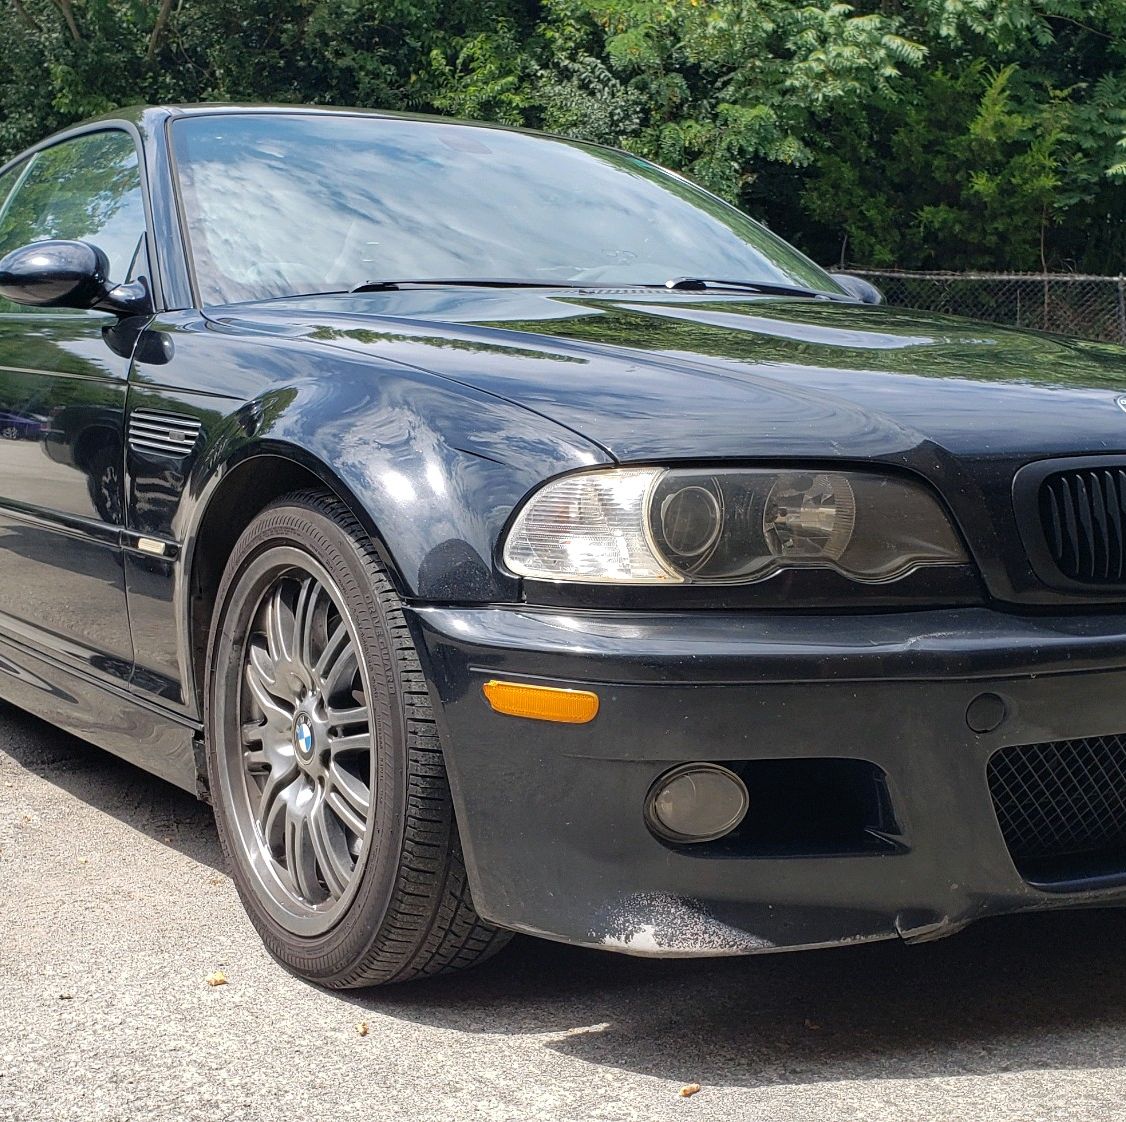 Have You Ever Seen A BMW E46 M3 That Looks As Nice As This?